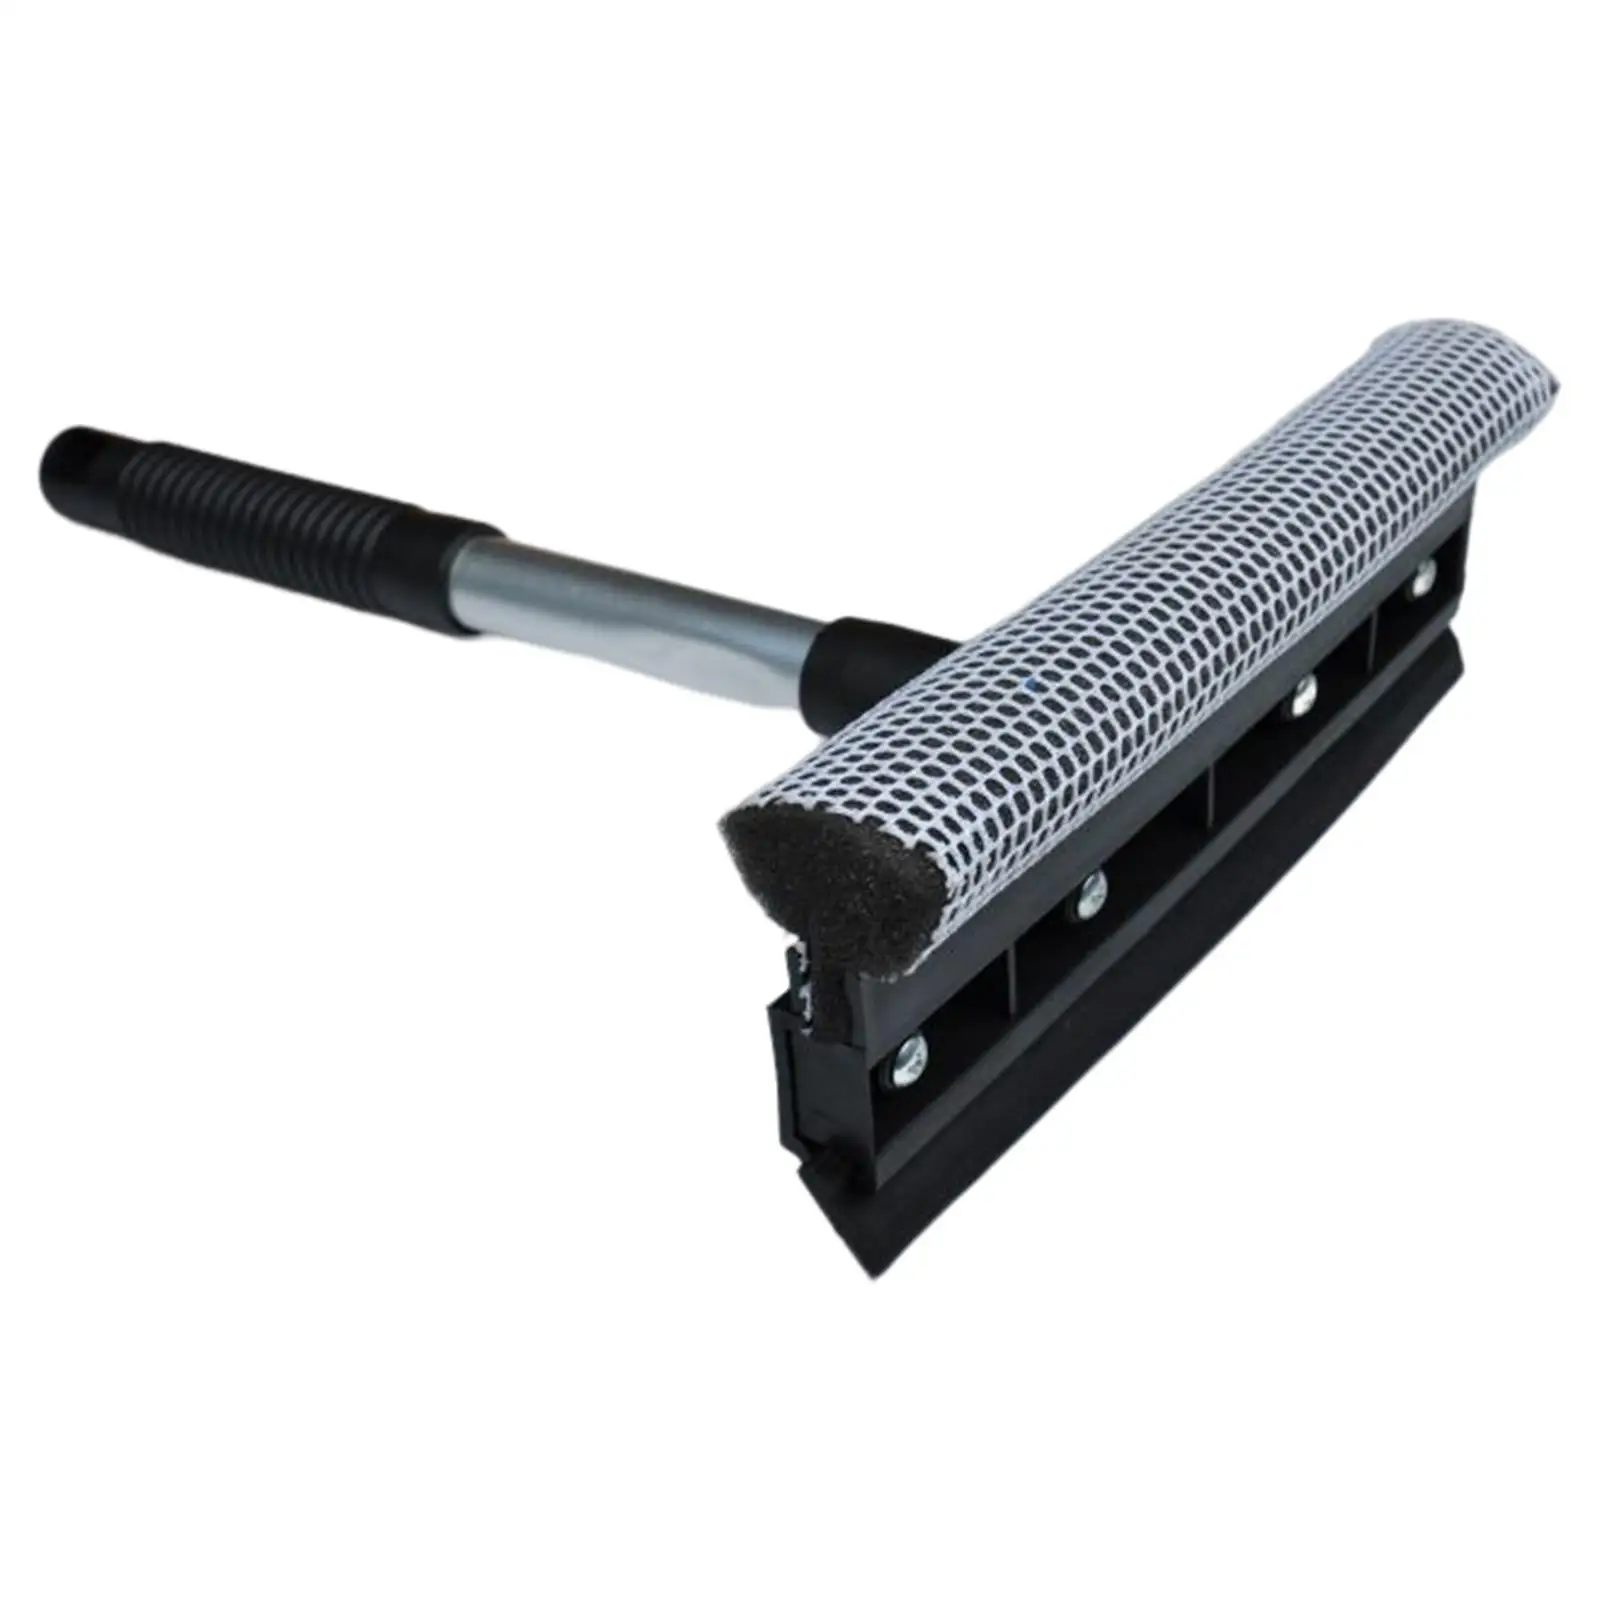 Window Wiper ,Window Washer ,Squeegee ,Window Cleaner Brush,chen Cleaning Tools .Glass Wiper. for shower Tile Floor